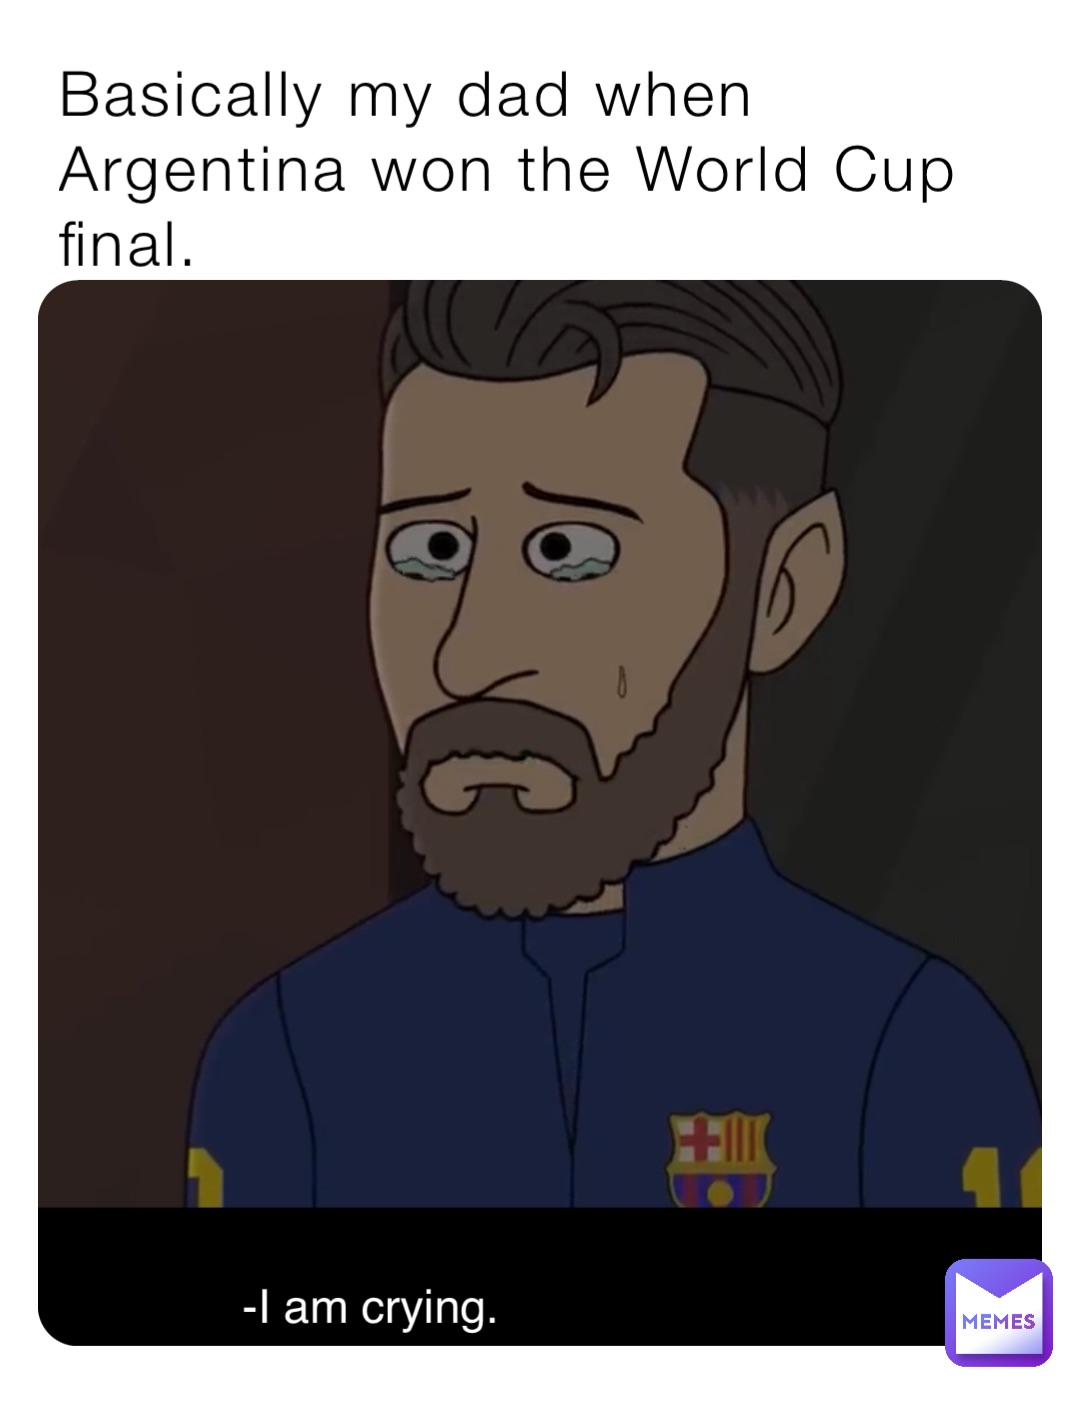 Basically my dad when Argentina won the World Cup final.